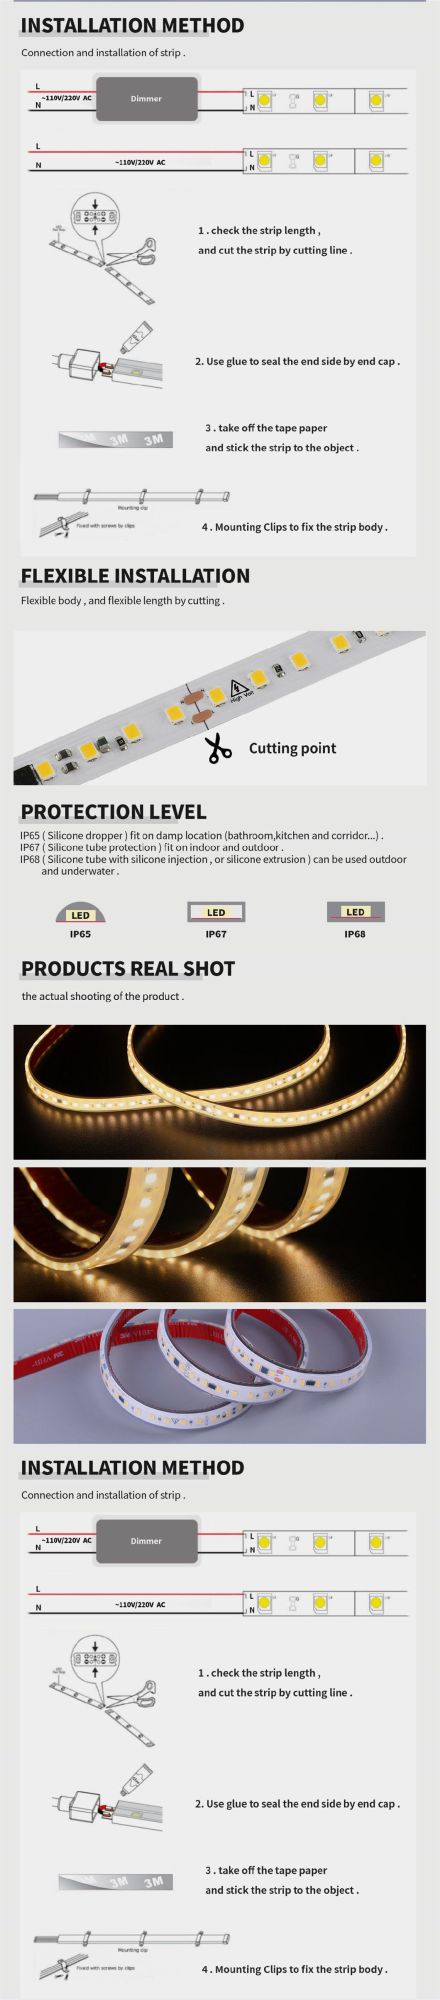 New Product High Voltage 2835 Flexible Strip LED Strip Light